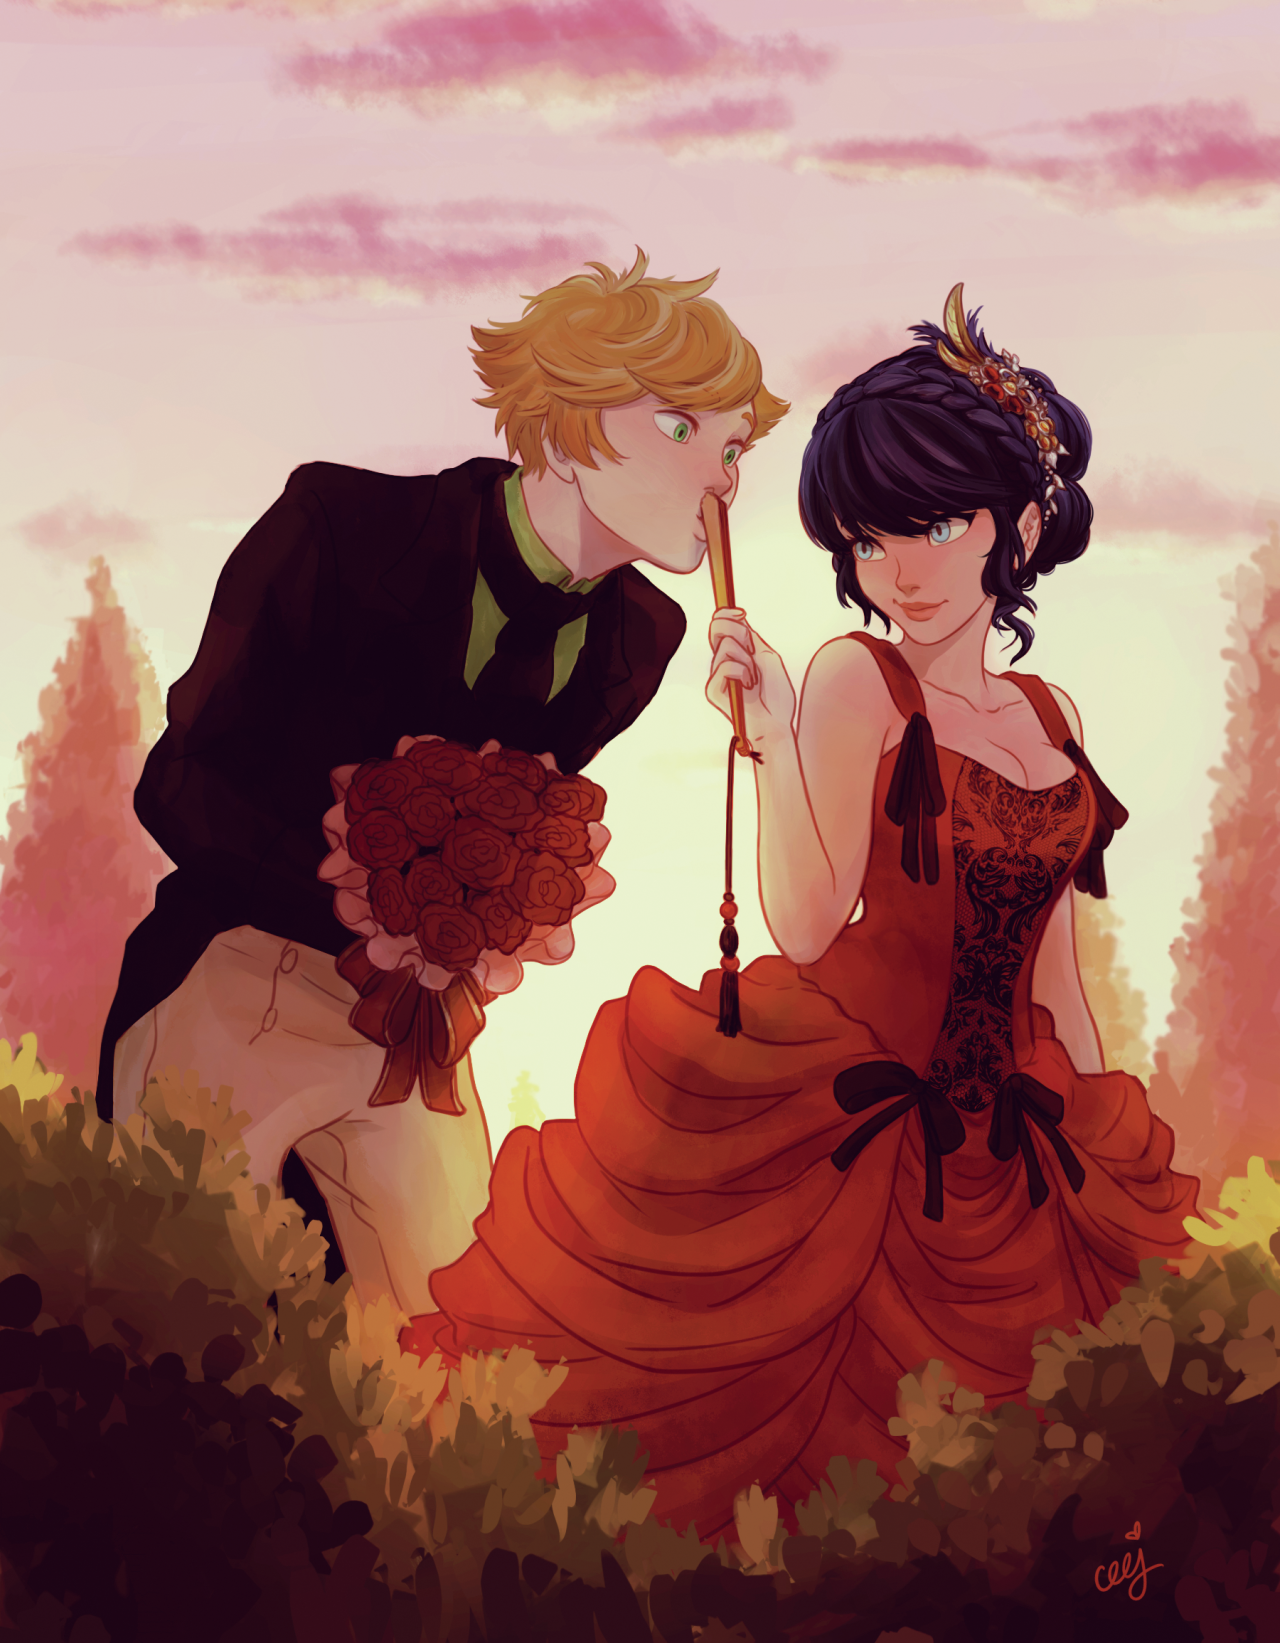 ceejles:
“ Here’s my stuff from the Miraculous Ladybug Charity-zine! Thank you @mayhugs for making this happen